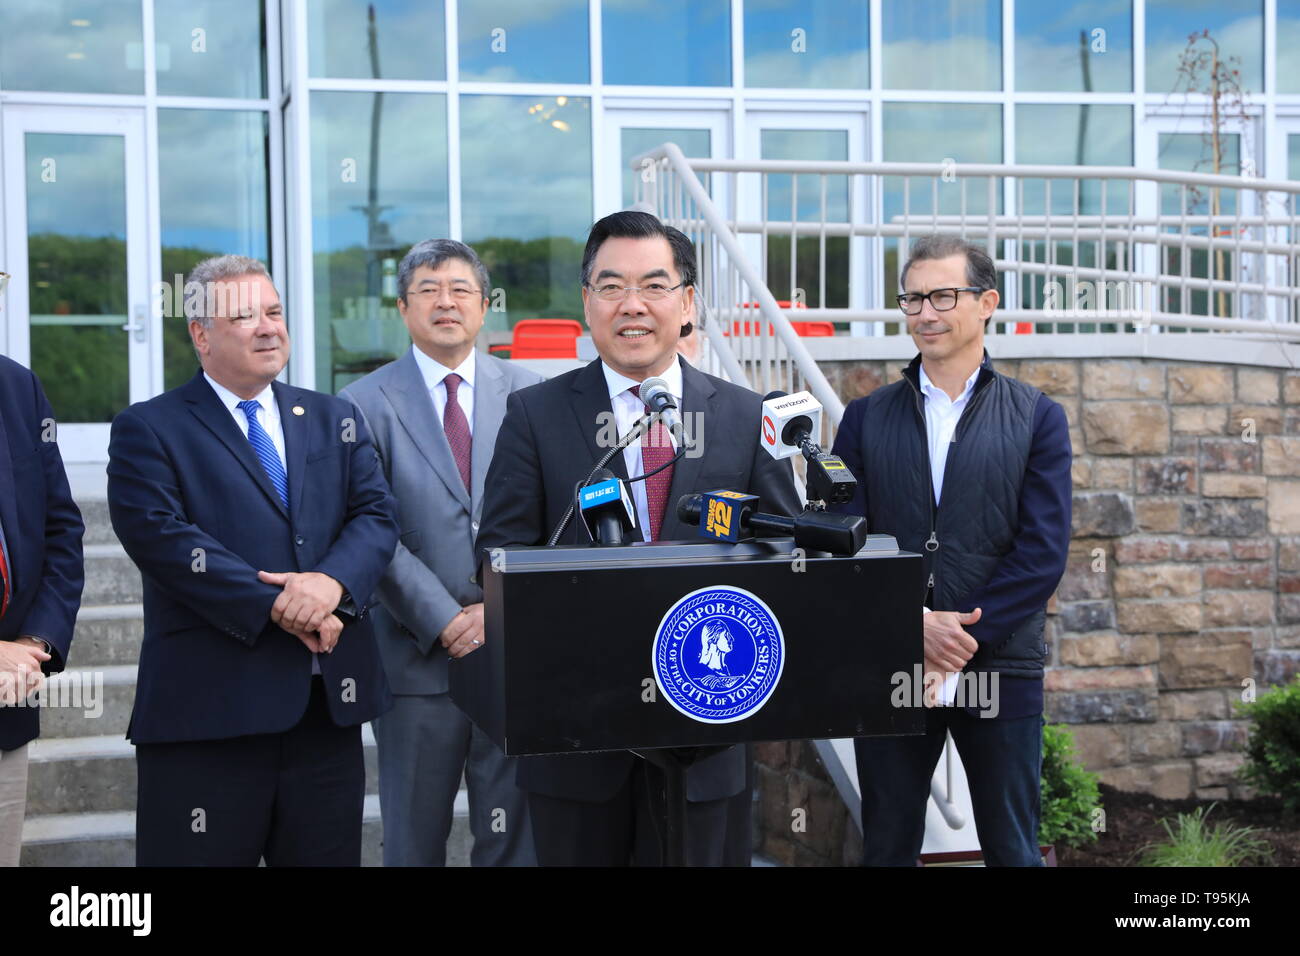 (190516) -- NEW YORK, May 16, 2019 (Xinhua) -- Huang Ping (C), Chinese Consul General in New York, gives a speech during a ribbon-cutting ceremony in the city of Yonkers, in the U.S. state of New York, on May 15, 2019. A China-invested residential building officially opened on Wednesday in the city of Yonkers, in the U.S. state of New York. The River Club at Hudson Park, a 214-unit luxury apartment building, is a public-private partnership project developed by China Construction America (CCA) since 2015. It helped complete the three-phased Hudson Park development plan that was started more tha Stock Photo